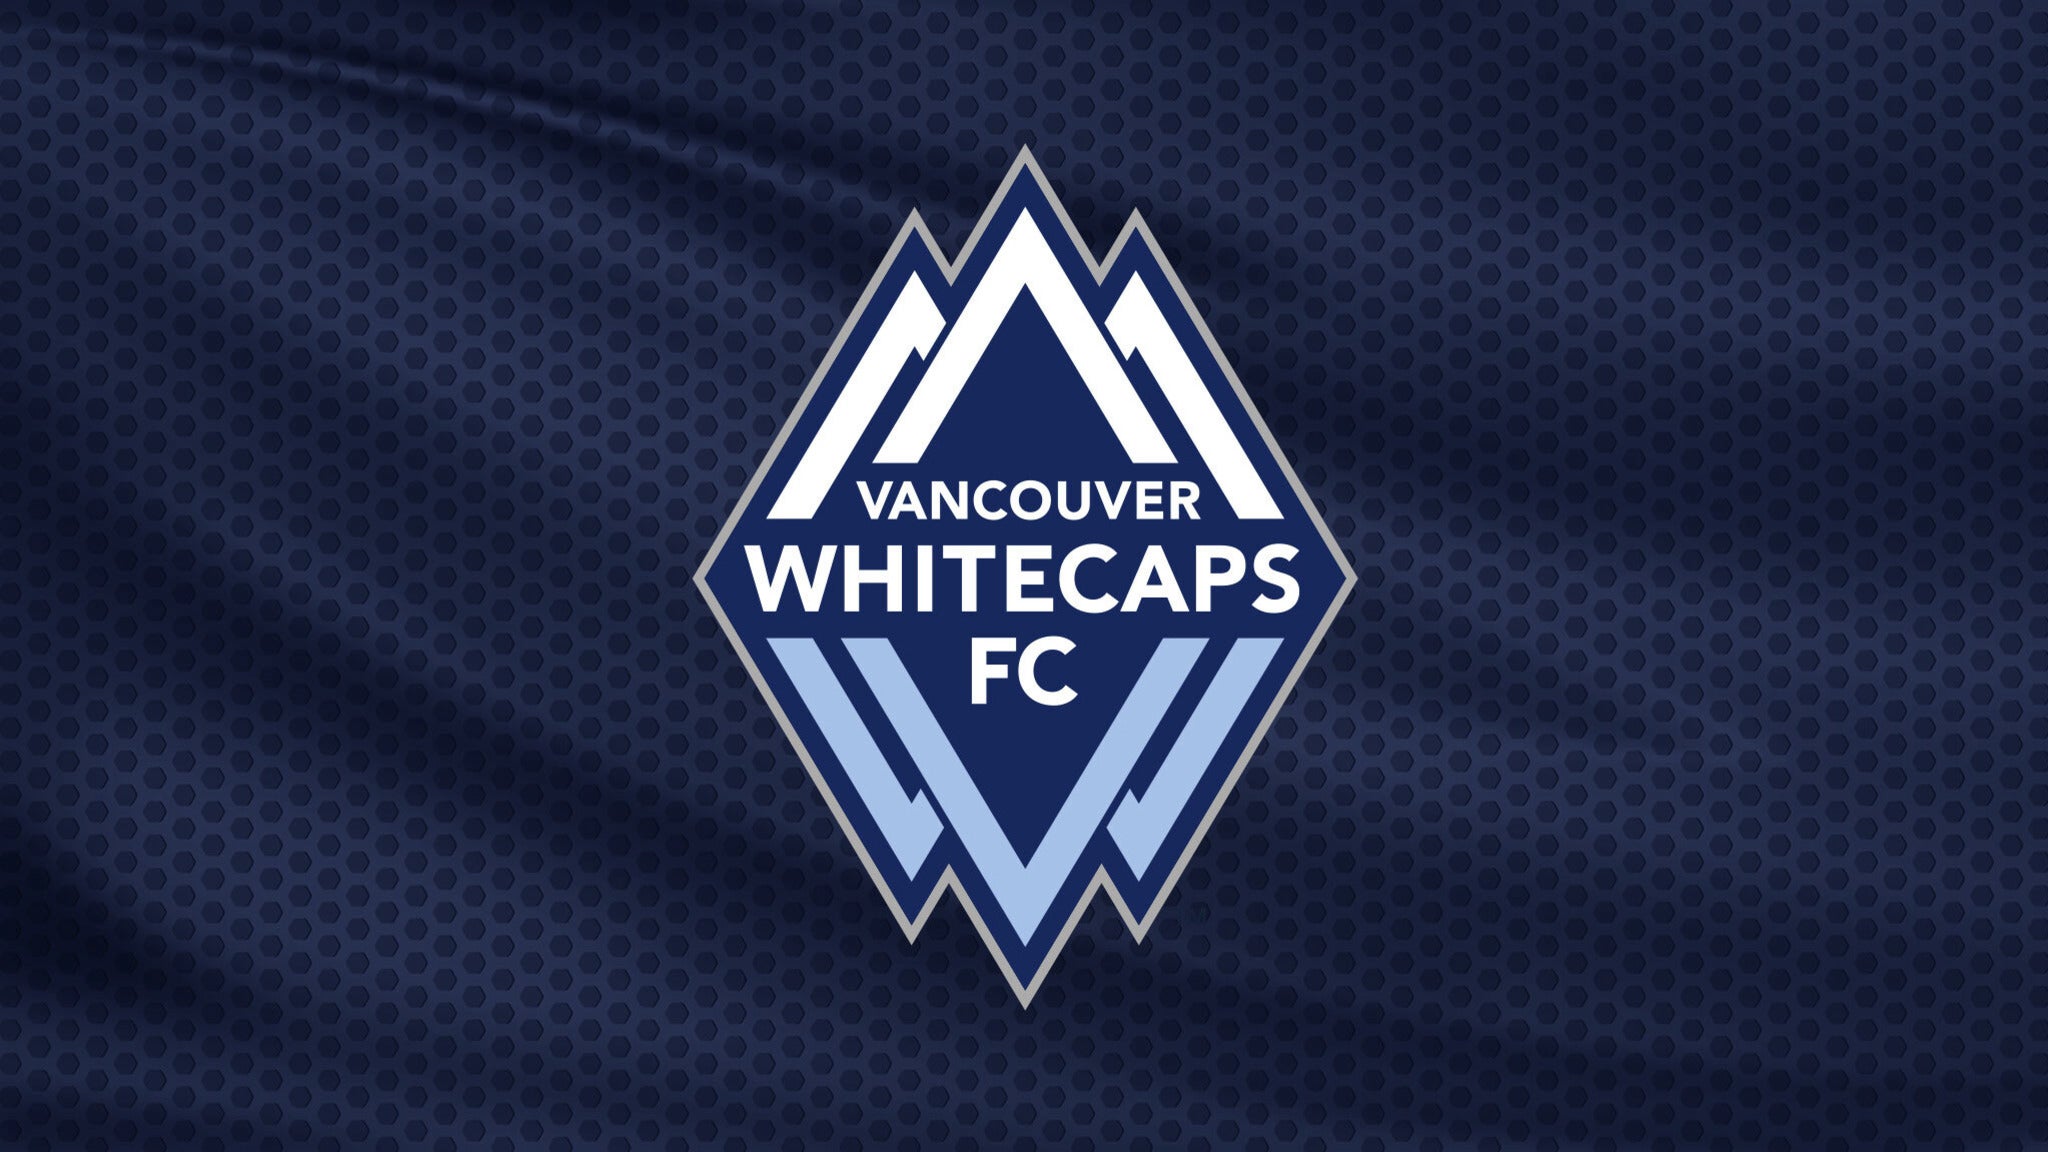 Whitecaps Game Saturday Comes With 50% Off Booze & Jerseys